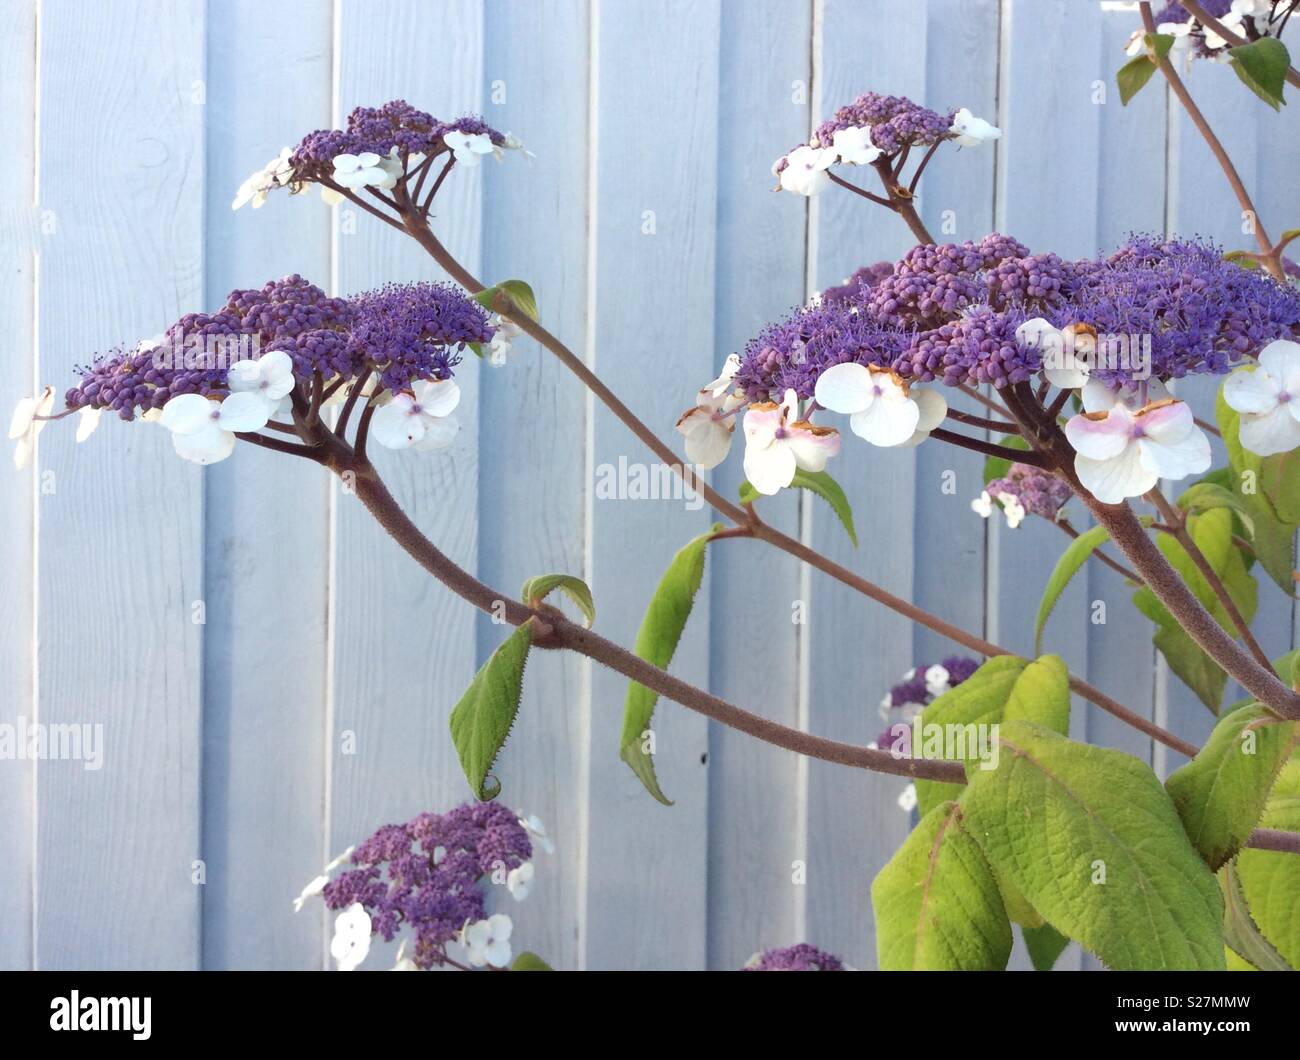 Blooming hydrangea aspera in front of white wooden wall Stock Photo